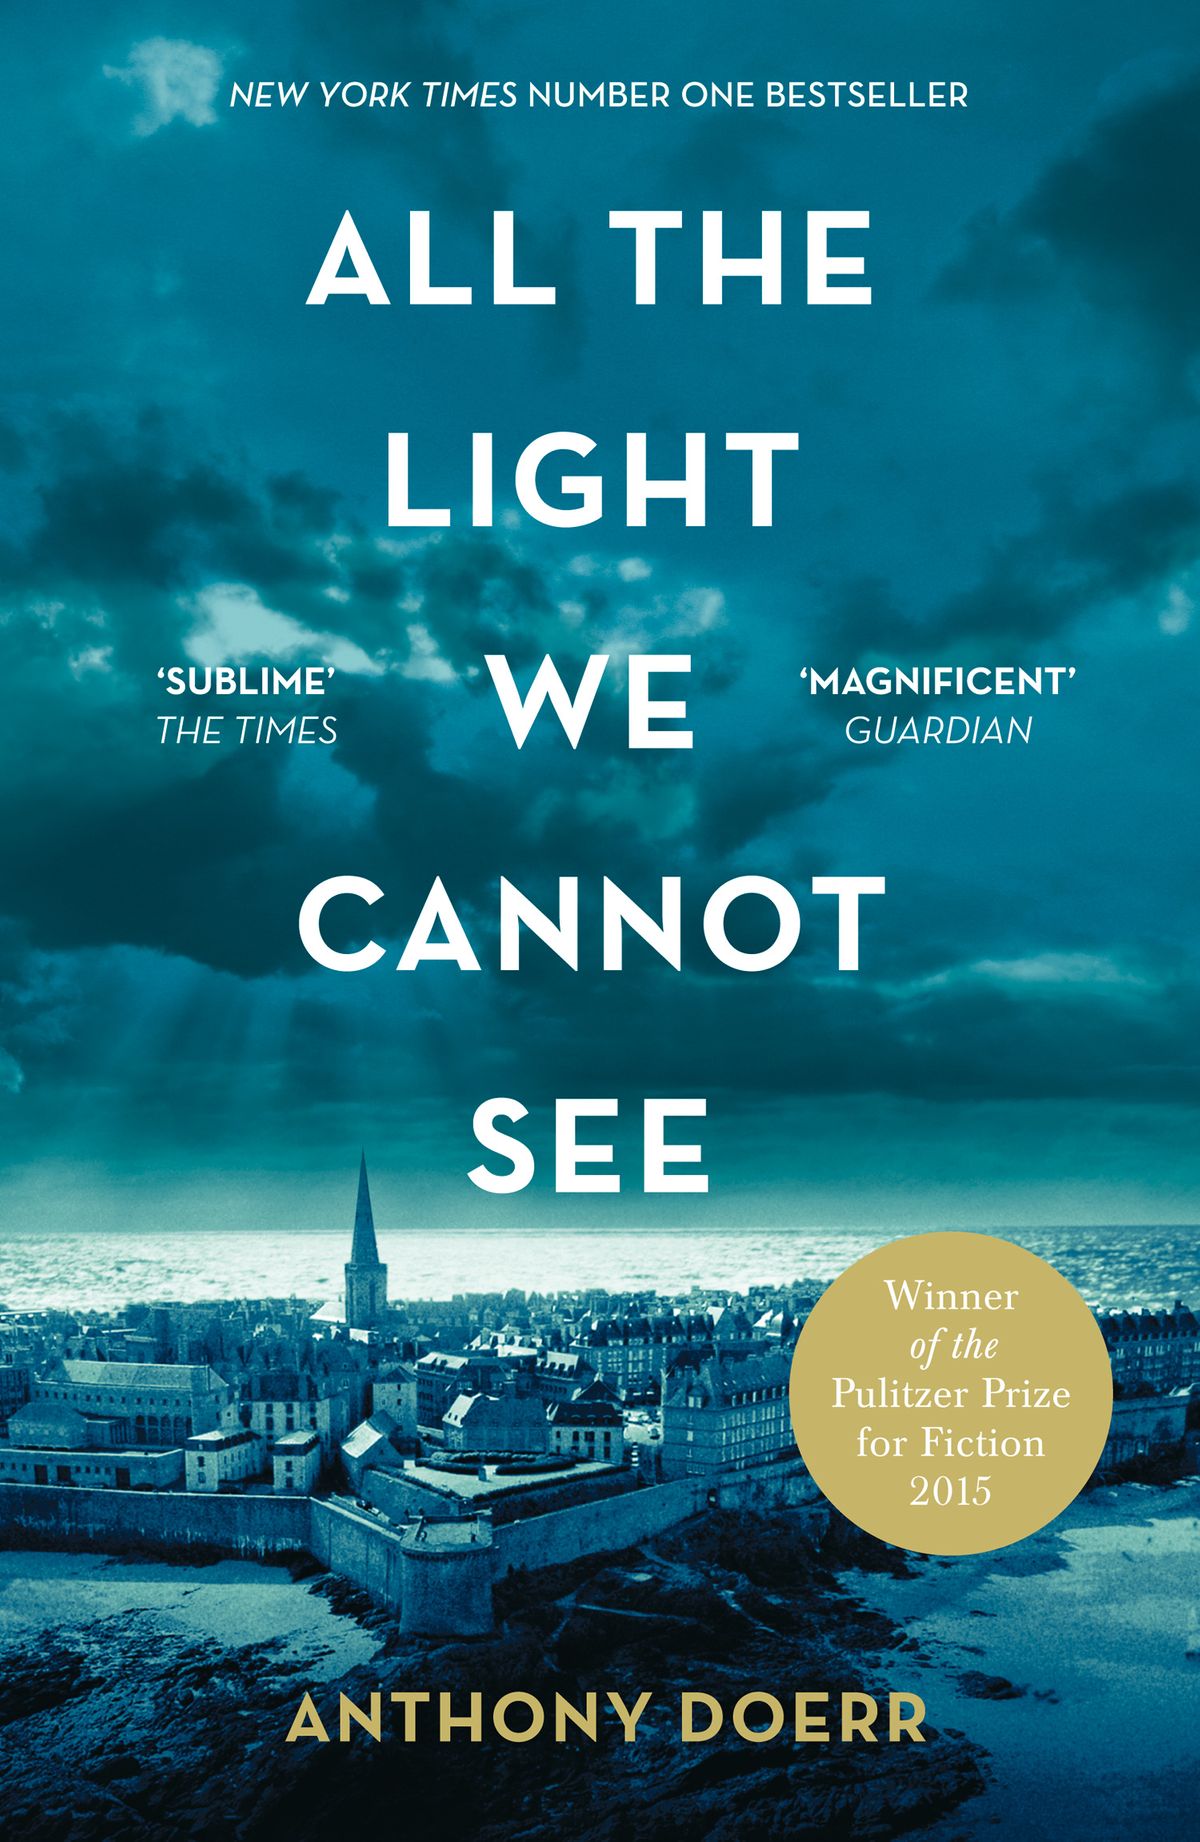 Cover of All the Light We Cannot See by Anthony Doerr